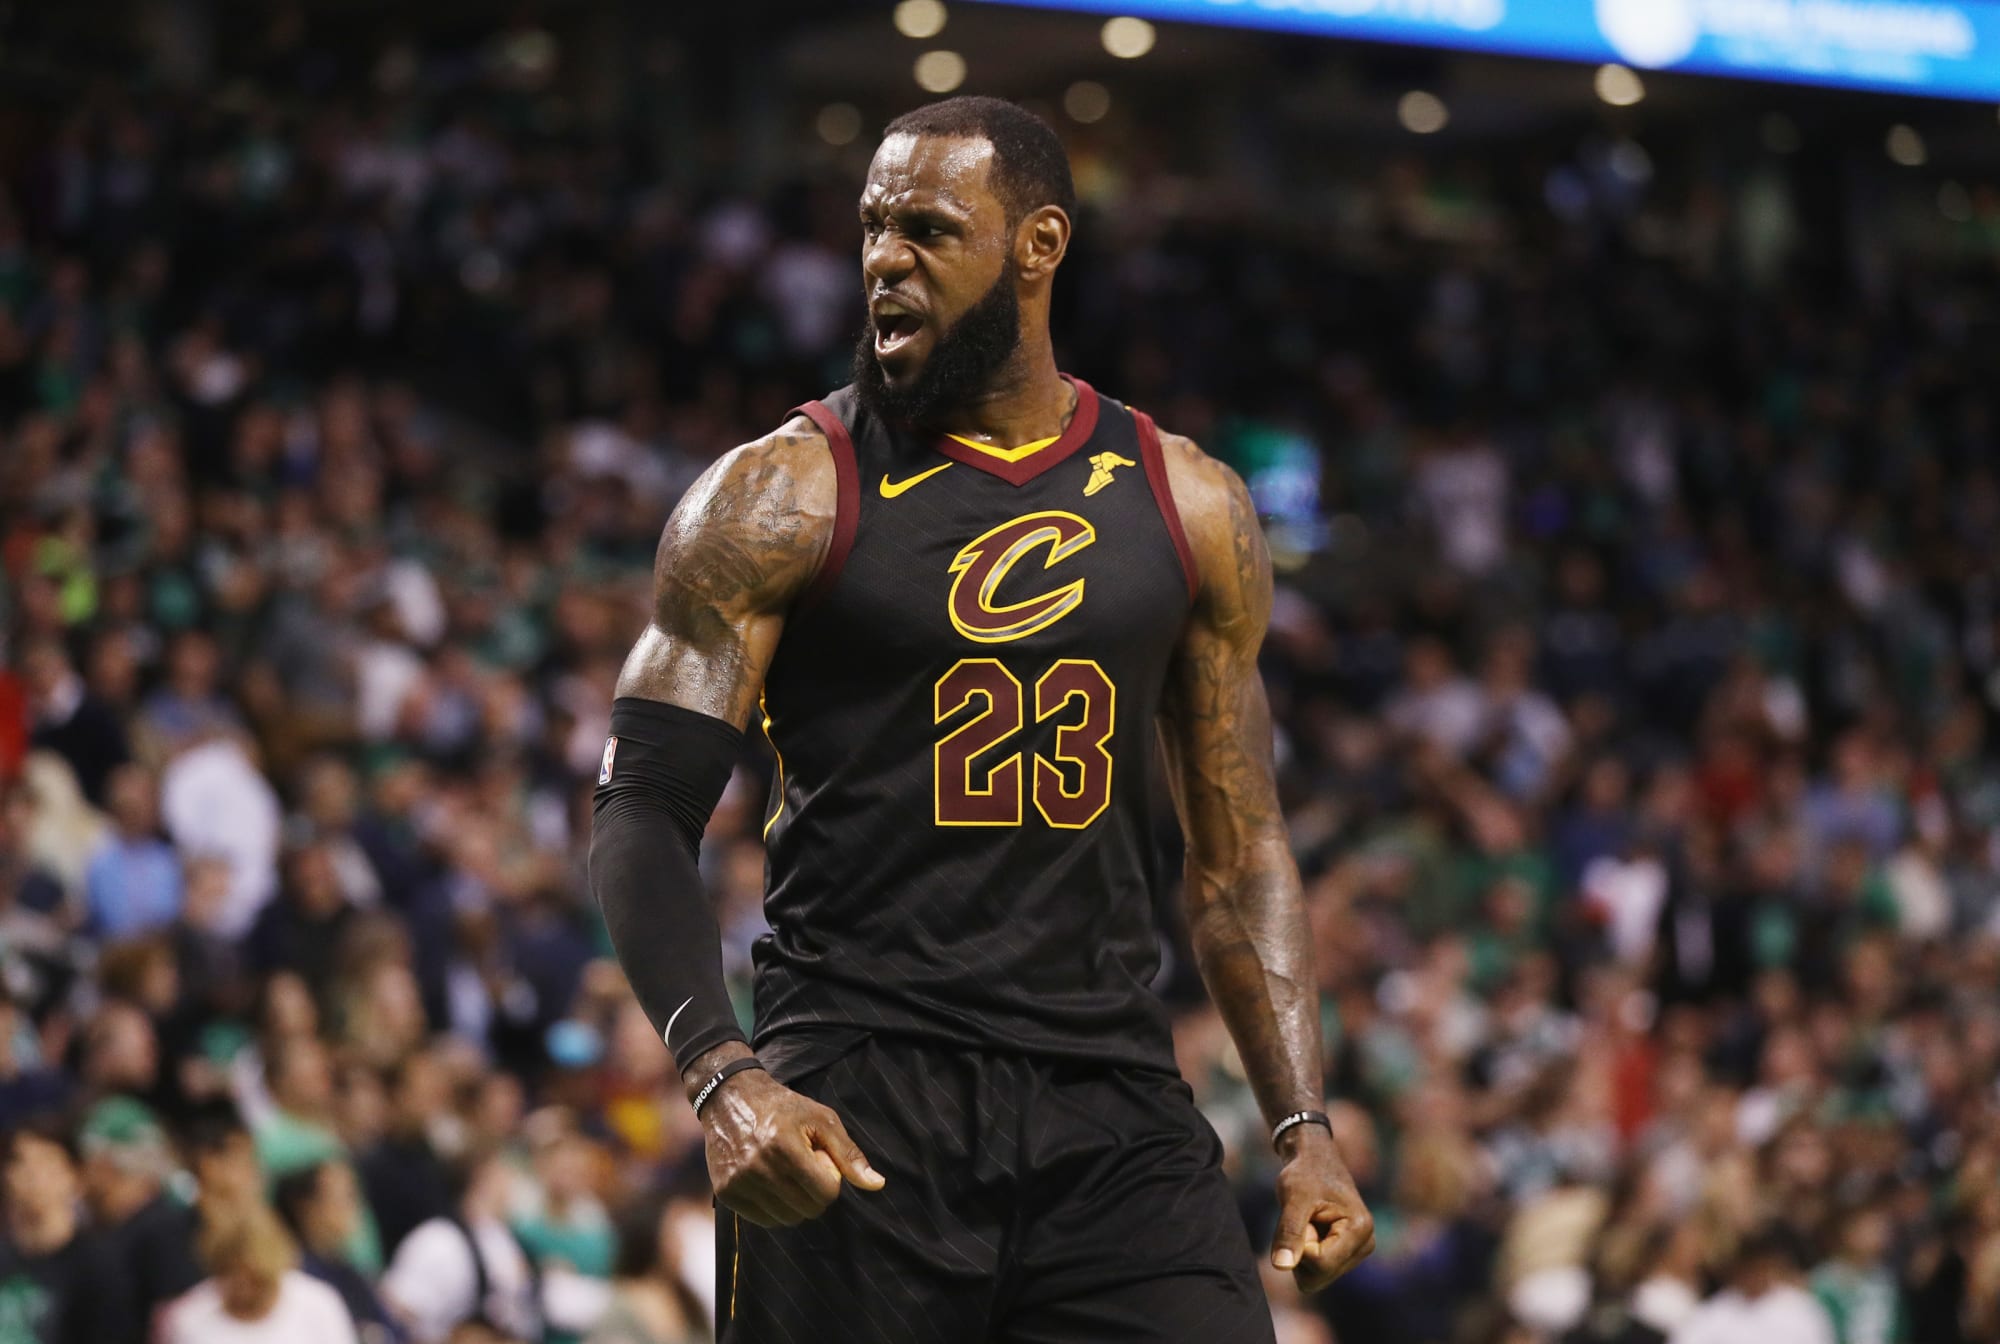 LeBron James is New York Knicks only hope of winning Eastern Conference